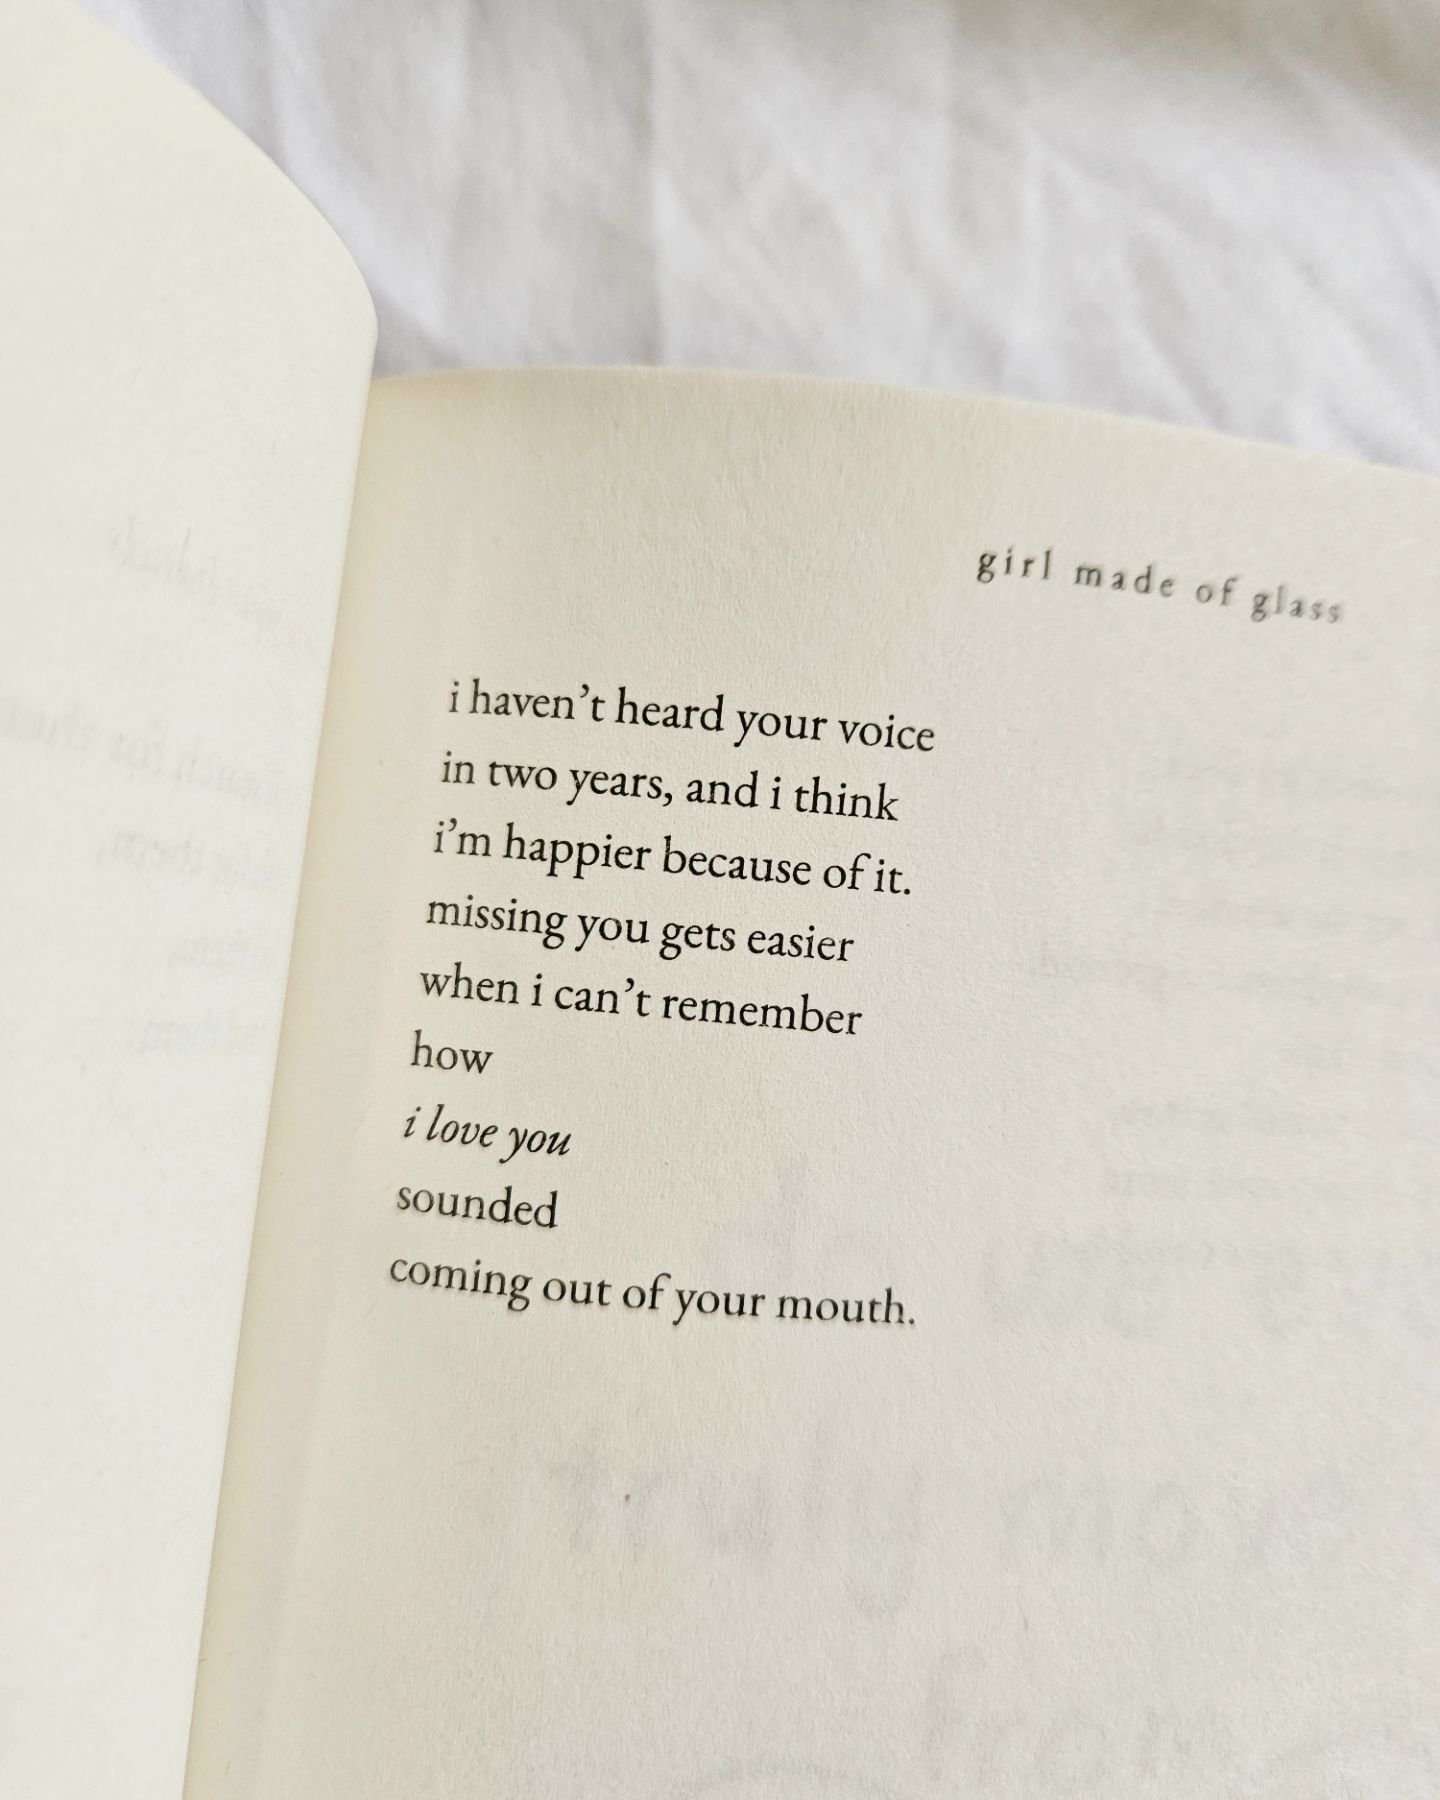 has there been a moment you NEVER thought you would begin to heal from? a moment you never thought you could go an hour without thinking about... and now you have? 

from my book, &quot;girl made of glass&quot; by shelby leigh on amazon or your favor